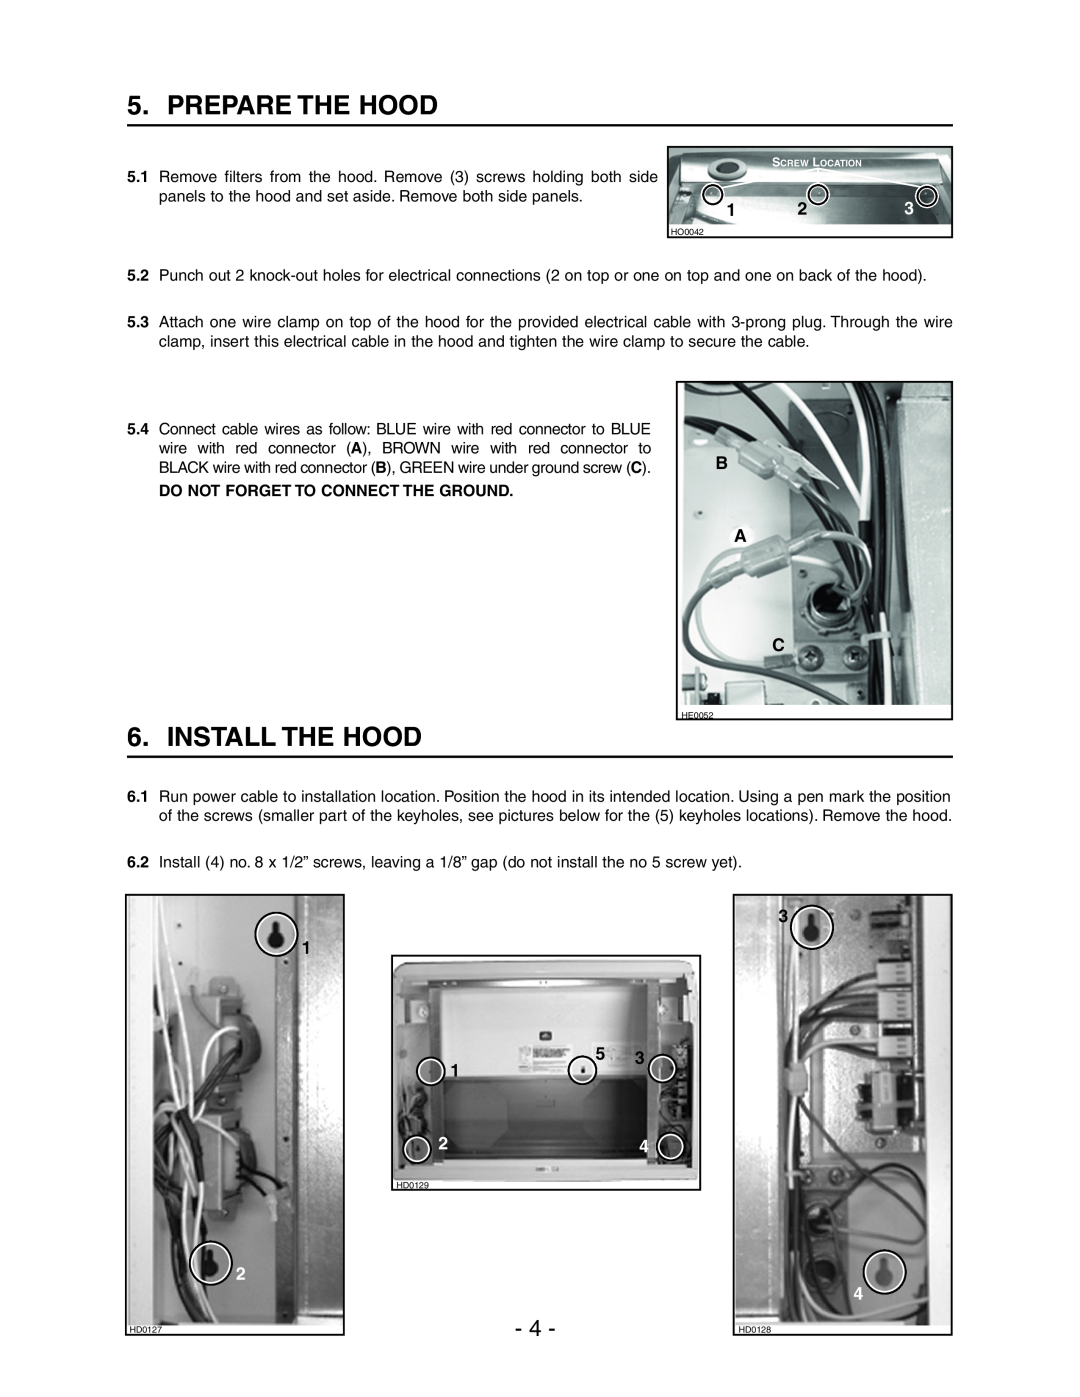 Broan Model E662 installation instructions Prepare The Hood, Install The Hood, B A C, Do Not Forget To Connect The Ground 